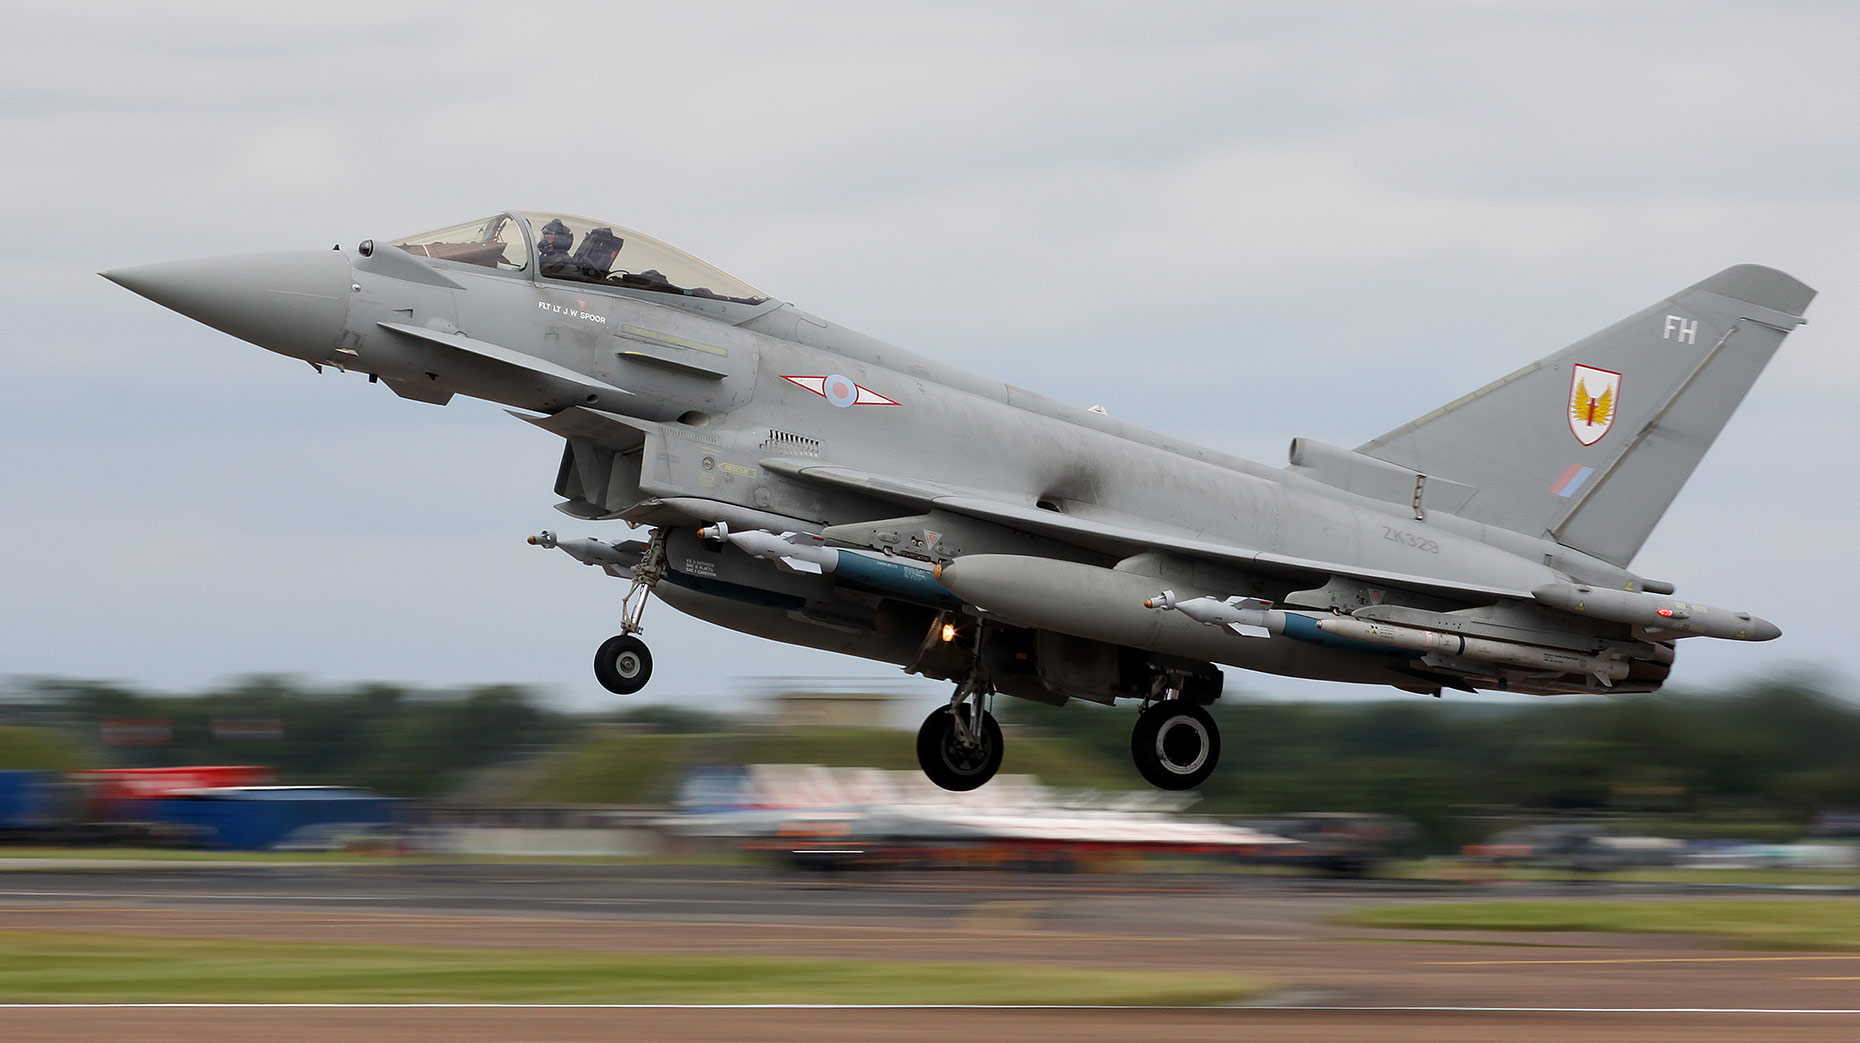 Exclusive: Three Typhoon Jets Landed Next to Thermometer When Britain’s ‘Record’ Temperature of 40.3°C Was Recorded – The Daily Sceptic